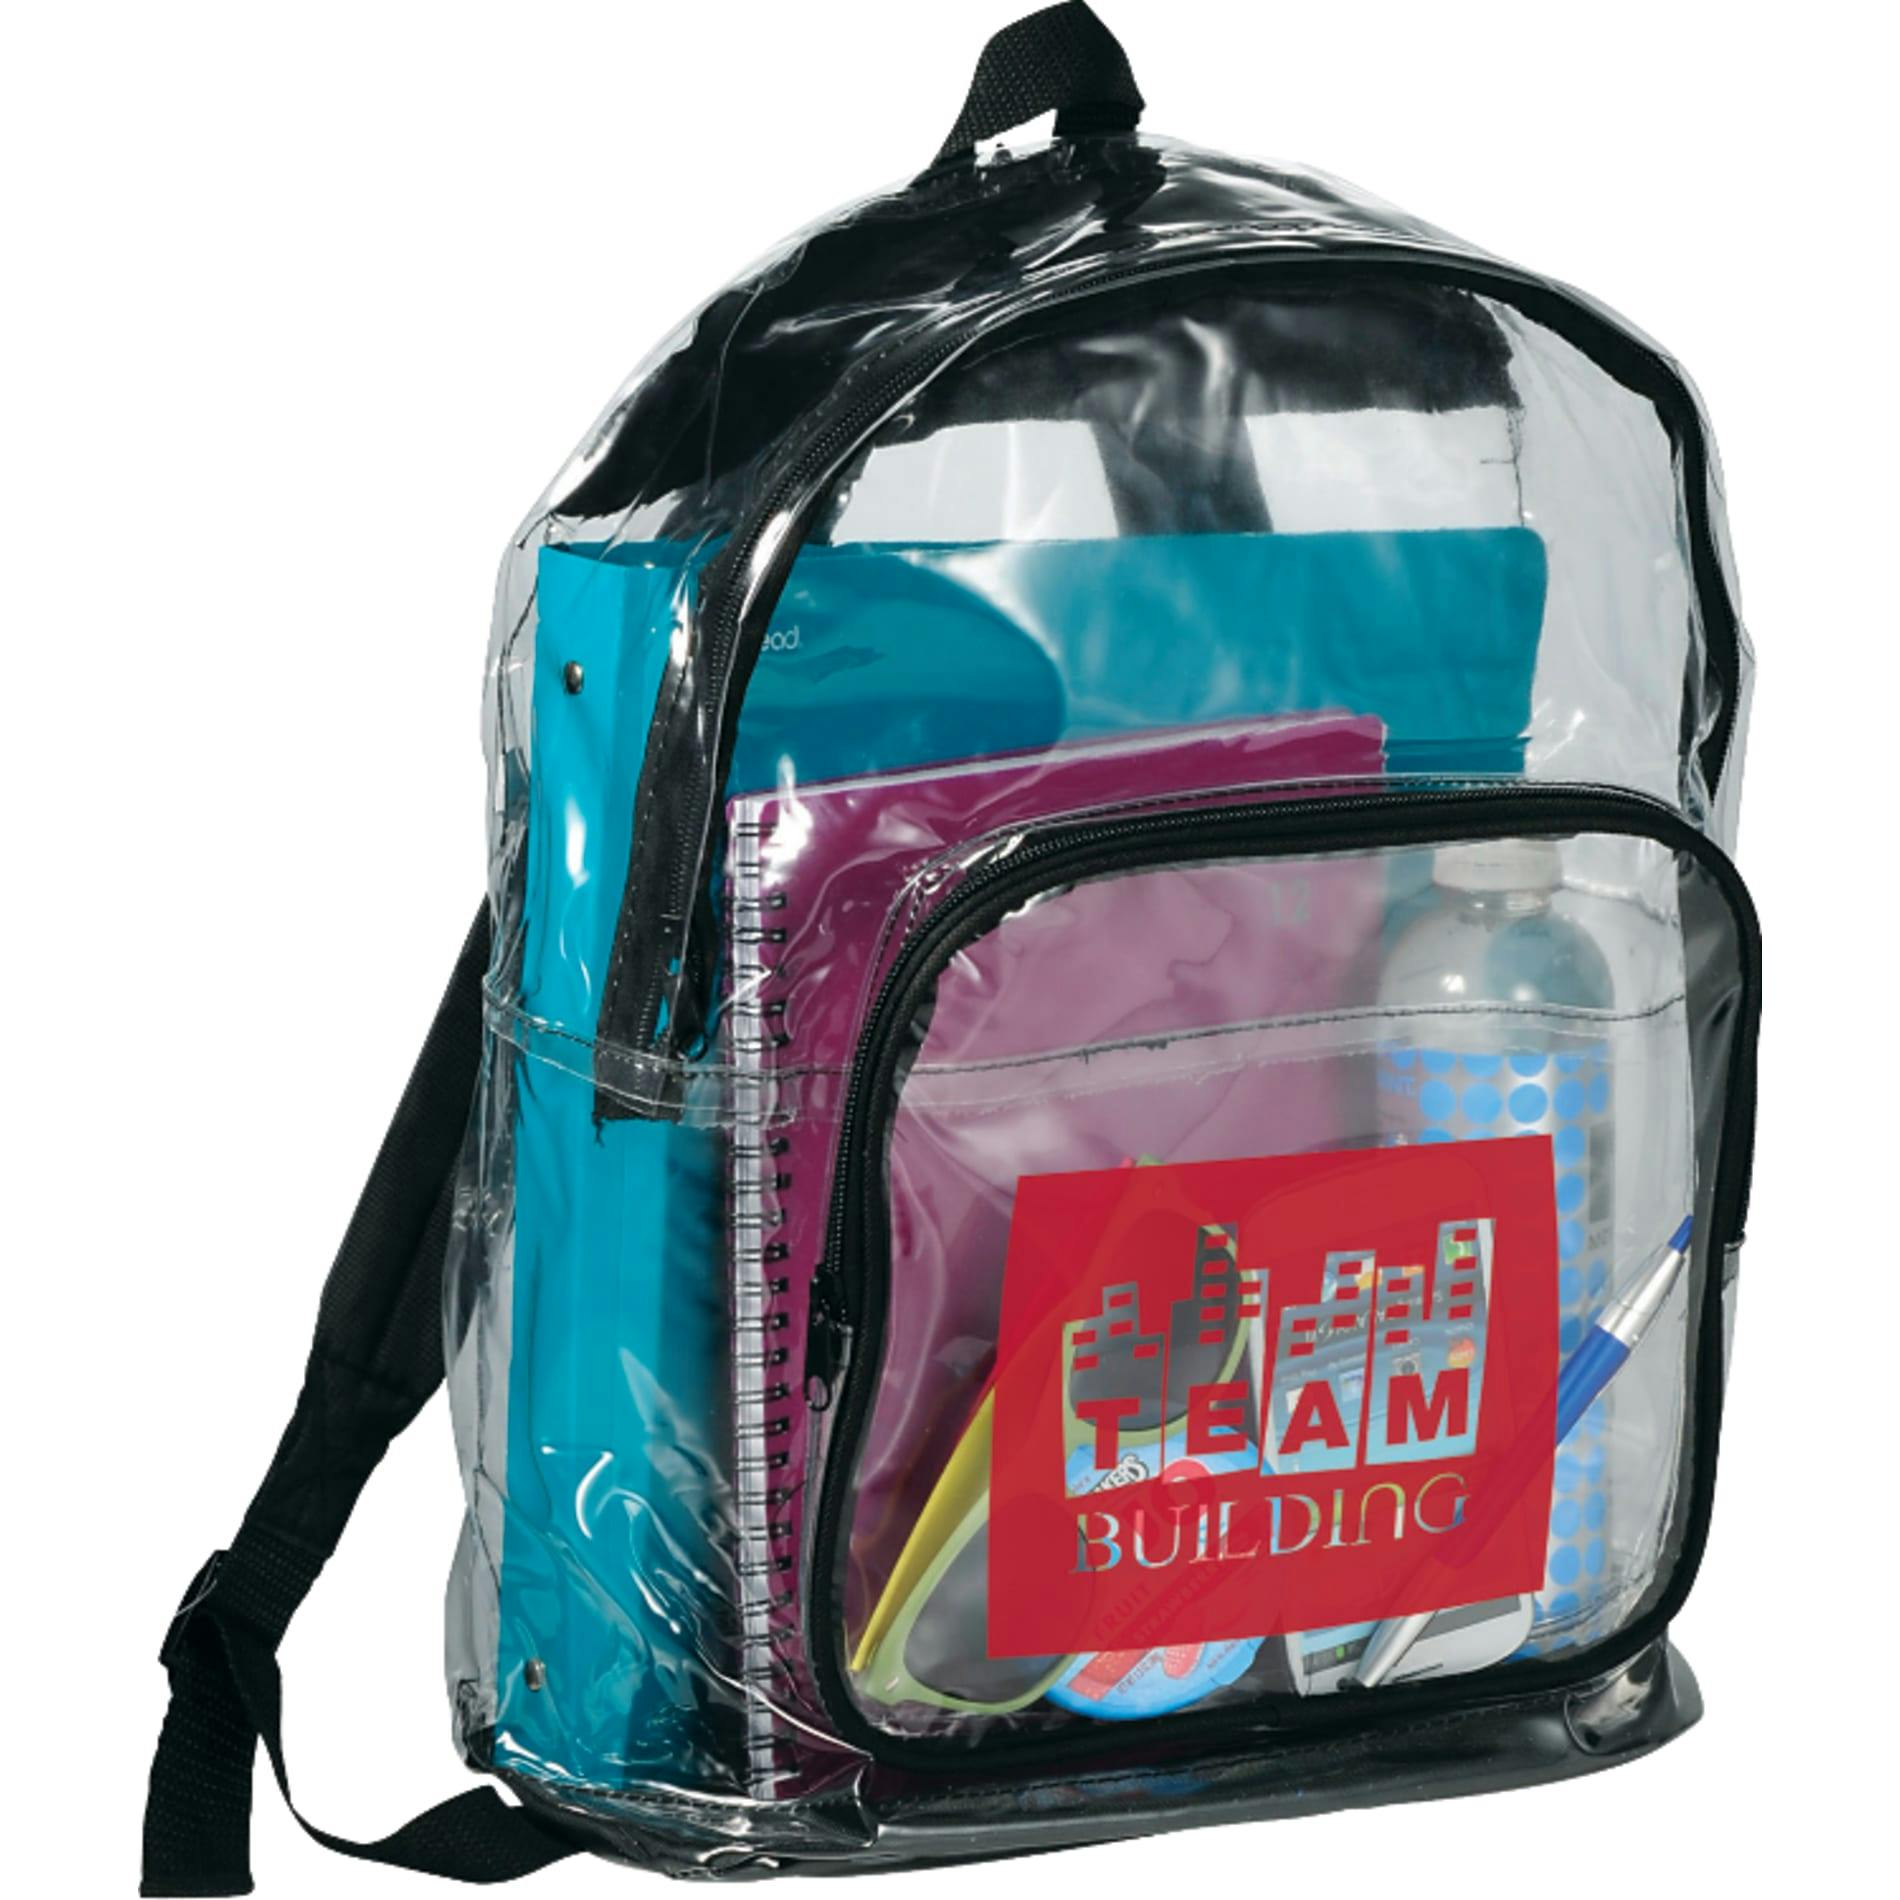 Rally Clear Backpack - additional Image 1